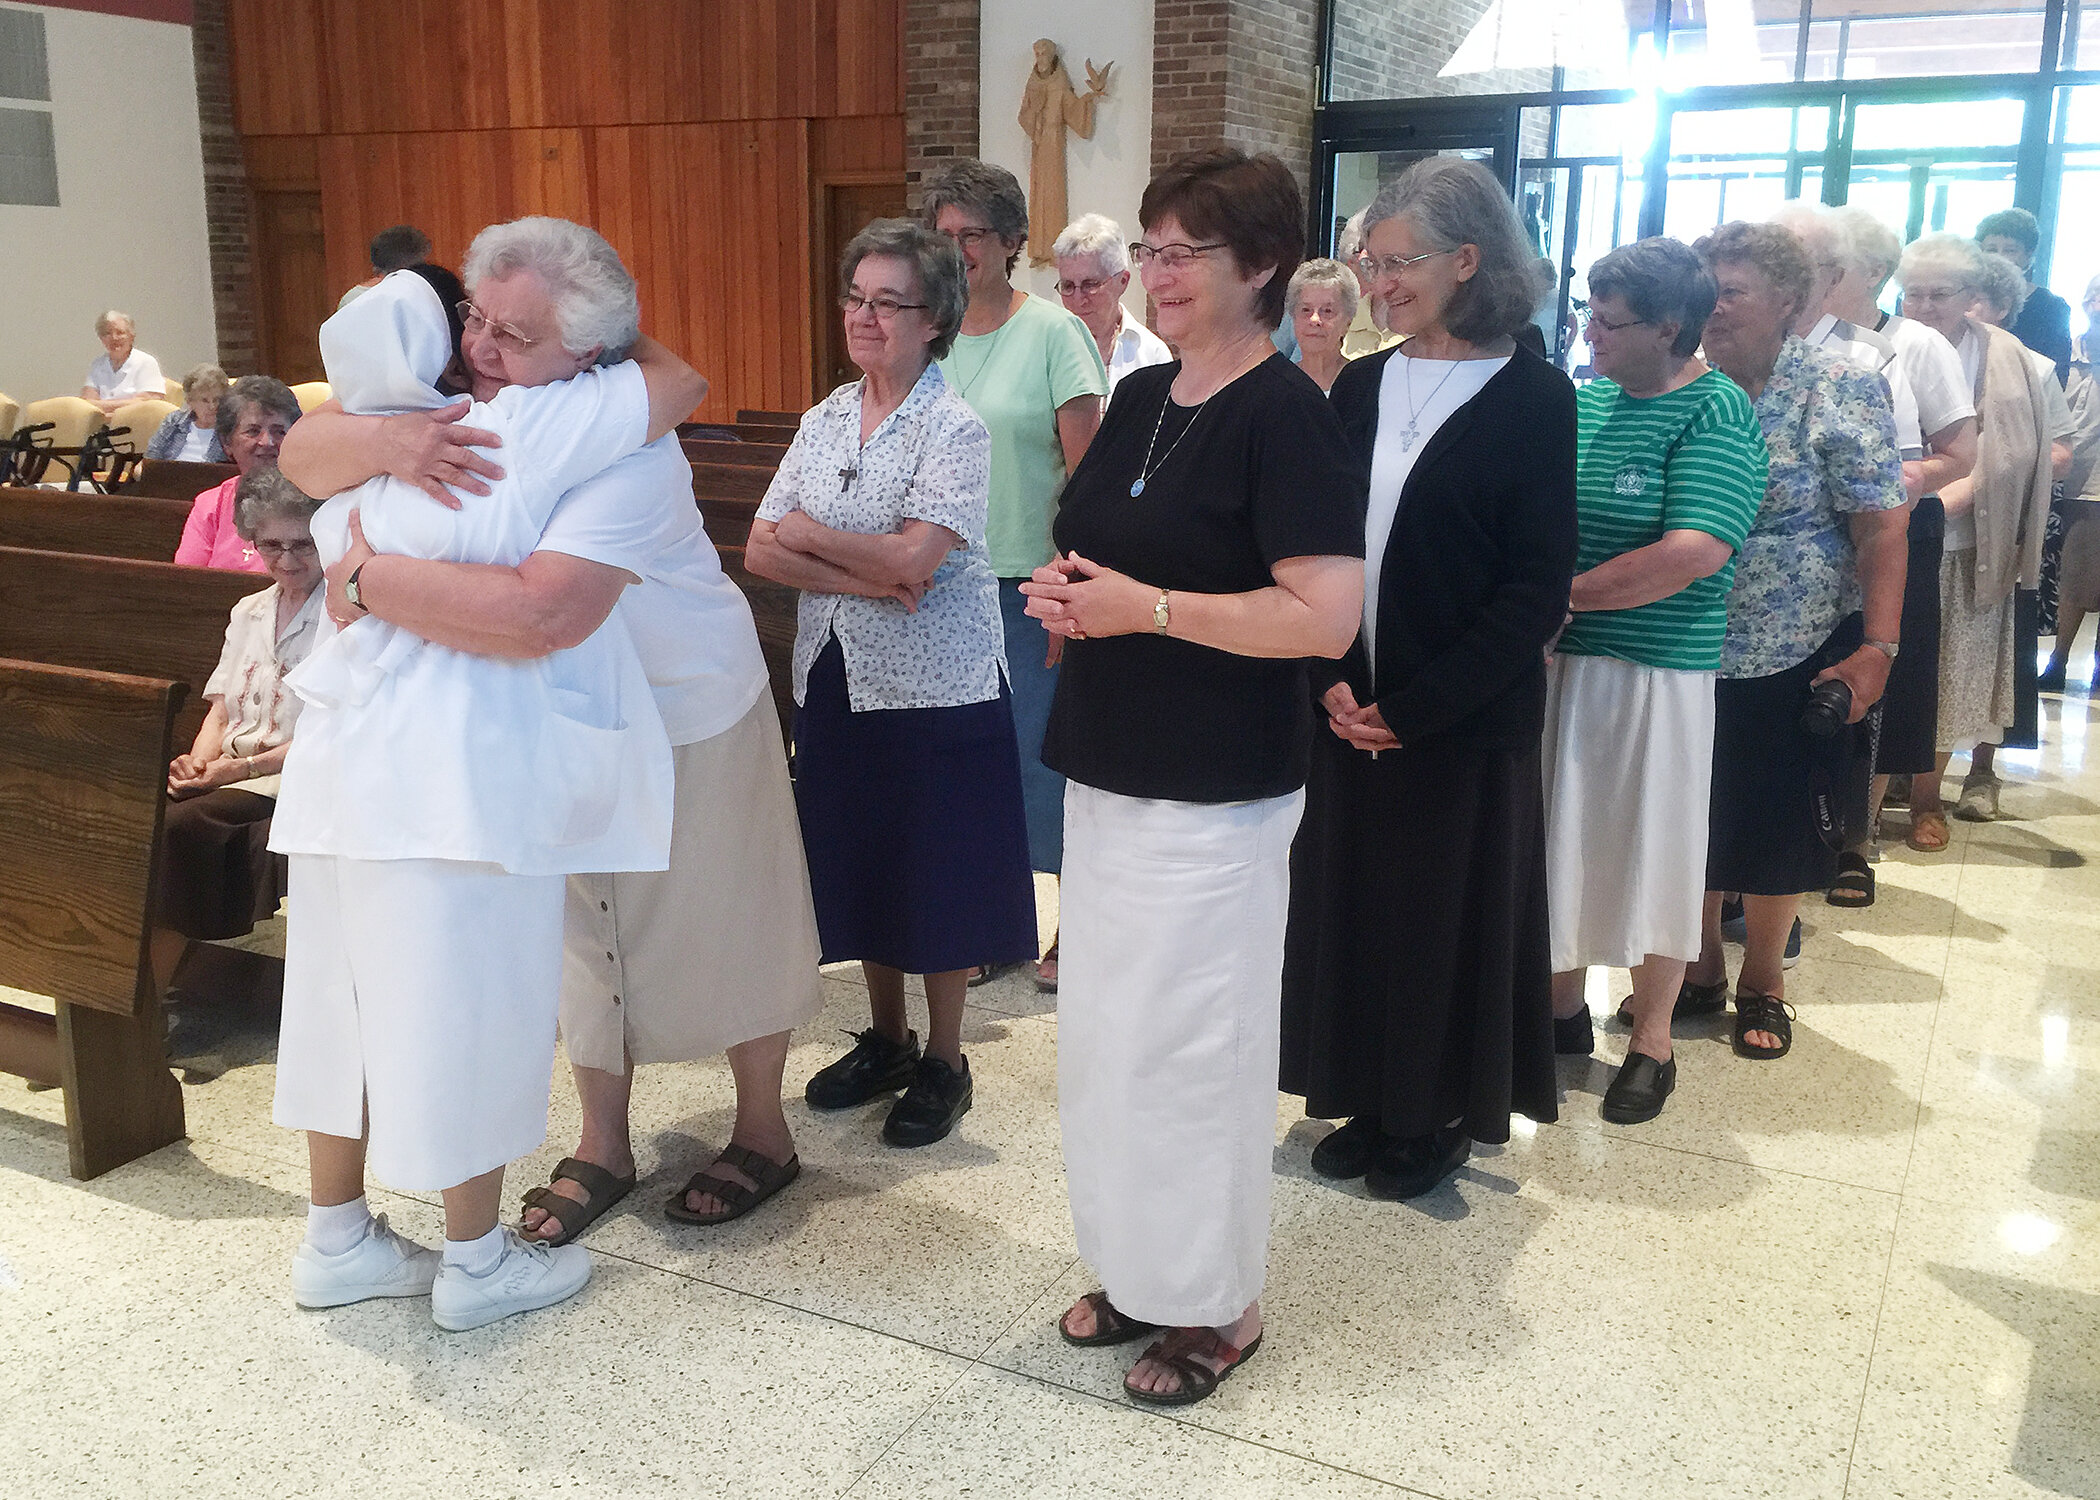  As Sister M. Virginelle Makos offers an embrace, other Sisters wait to personally welcome Sister Gracy Kundukulam as a member of the U.S. Province in 2016. 